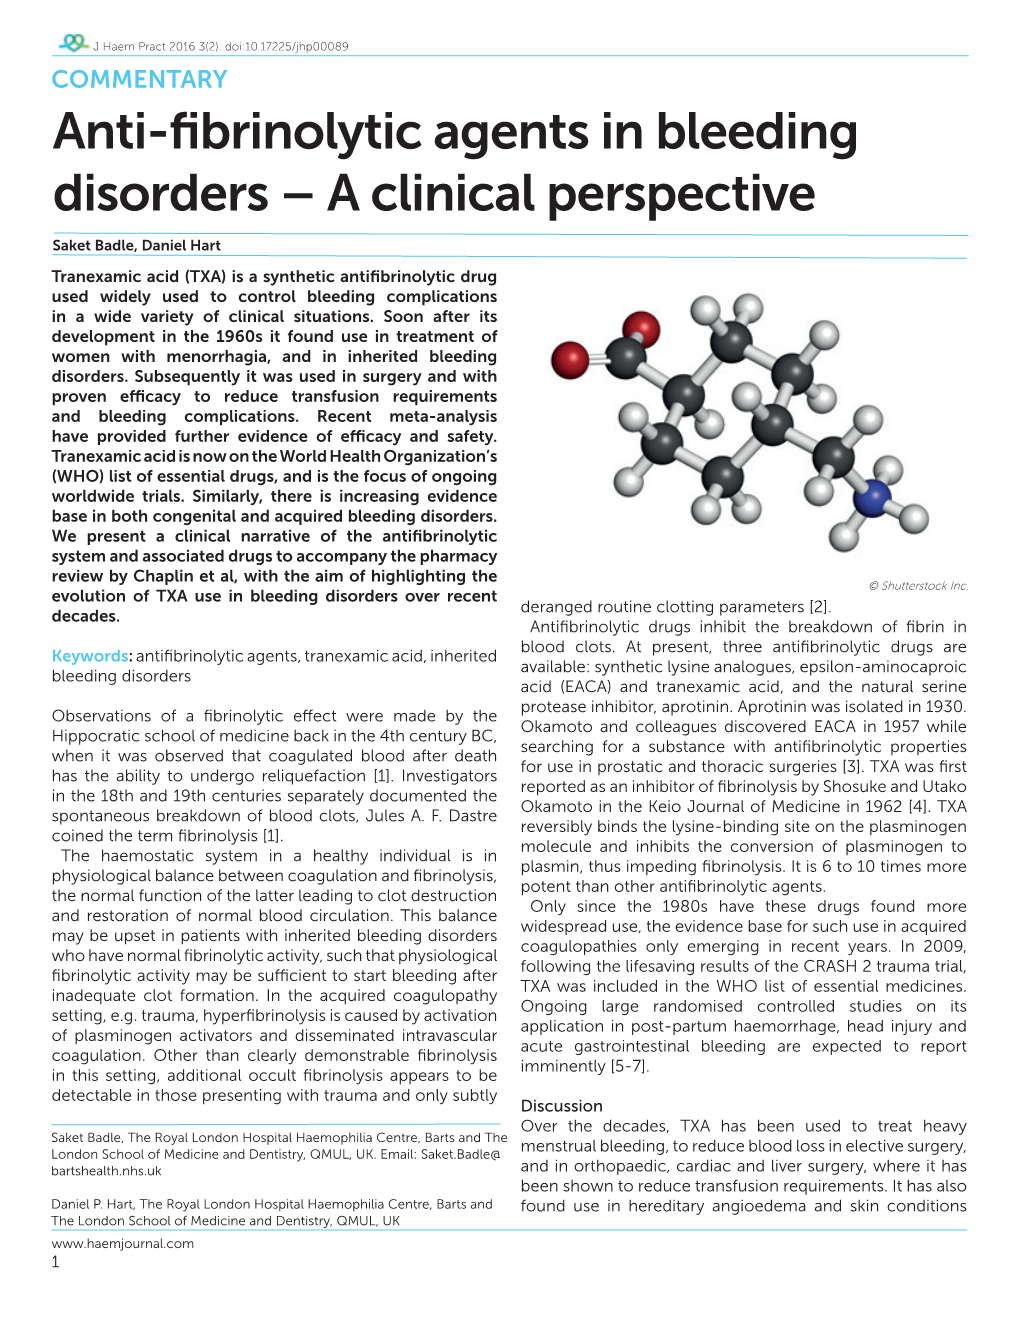 Anti-Fibrinolytic Agents in Bleeding Disorders – a Clinical Perspective